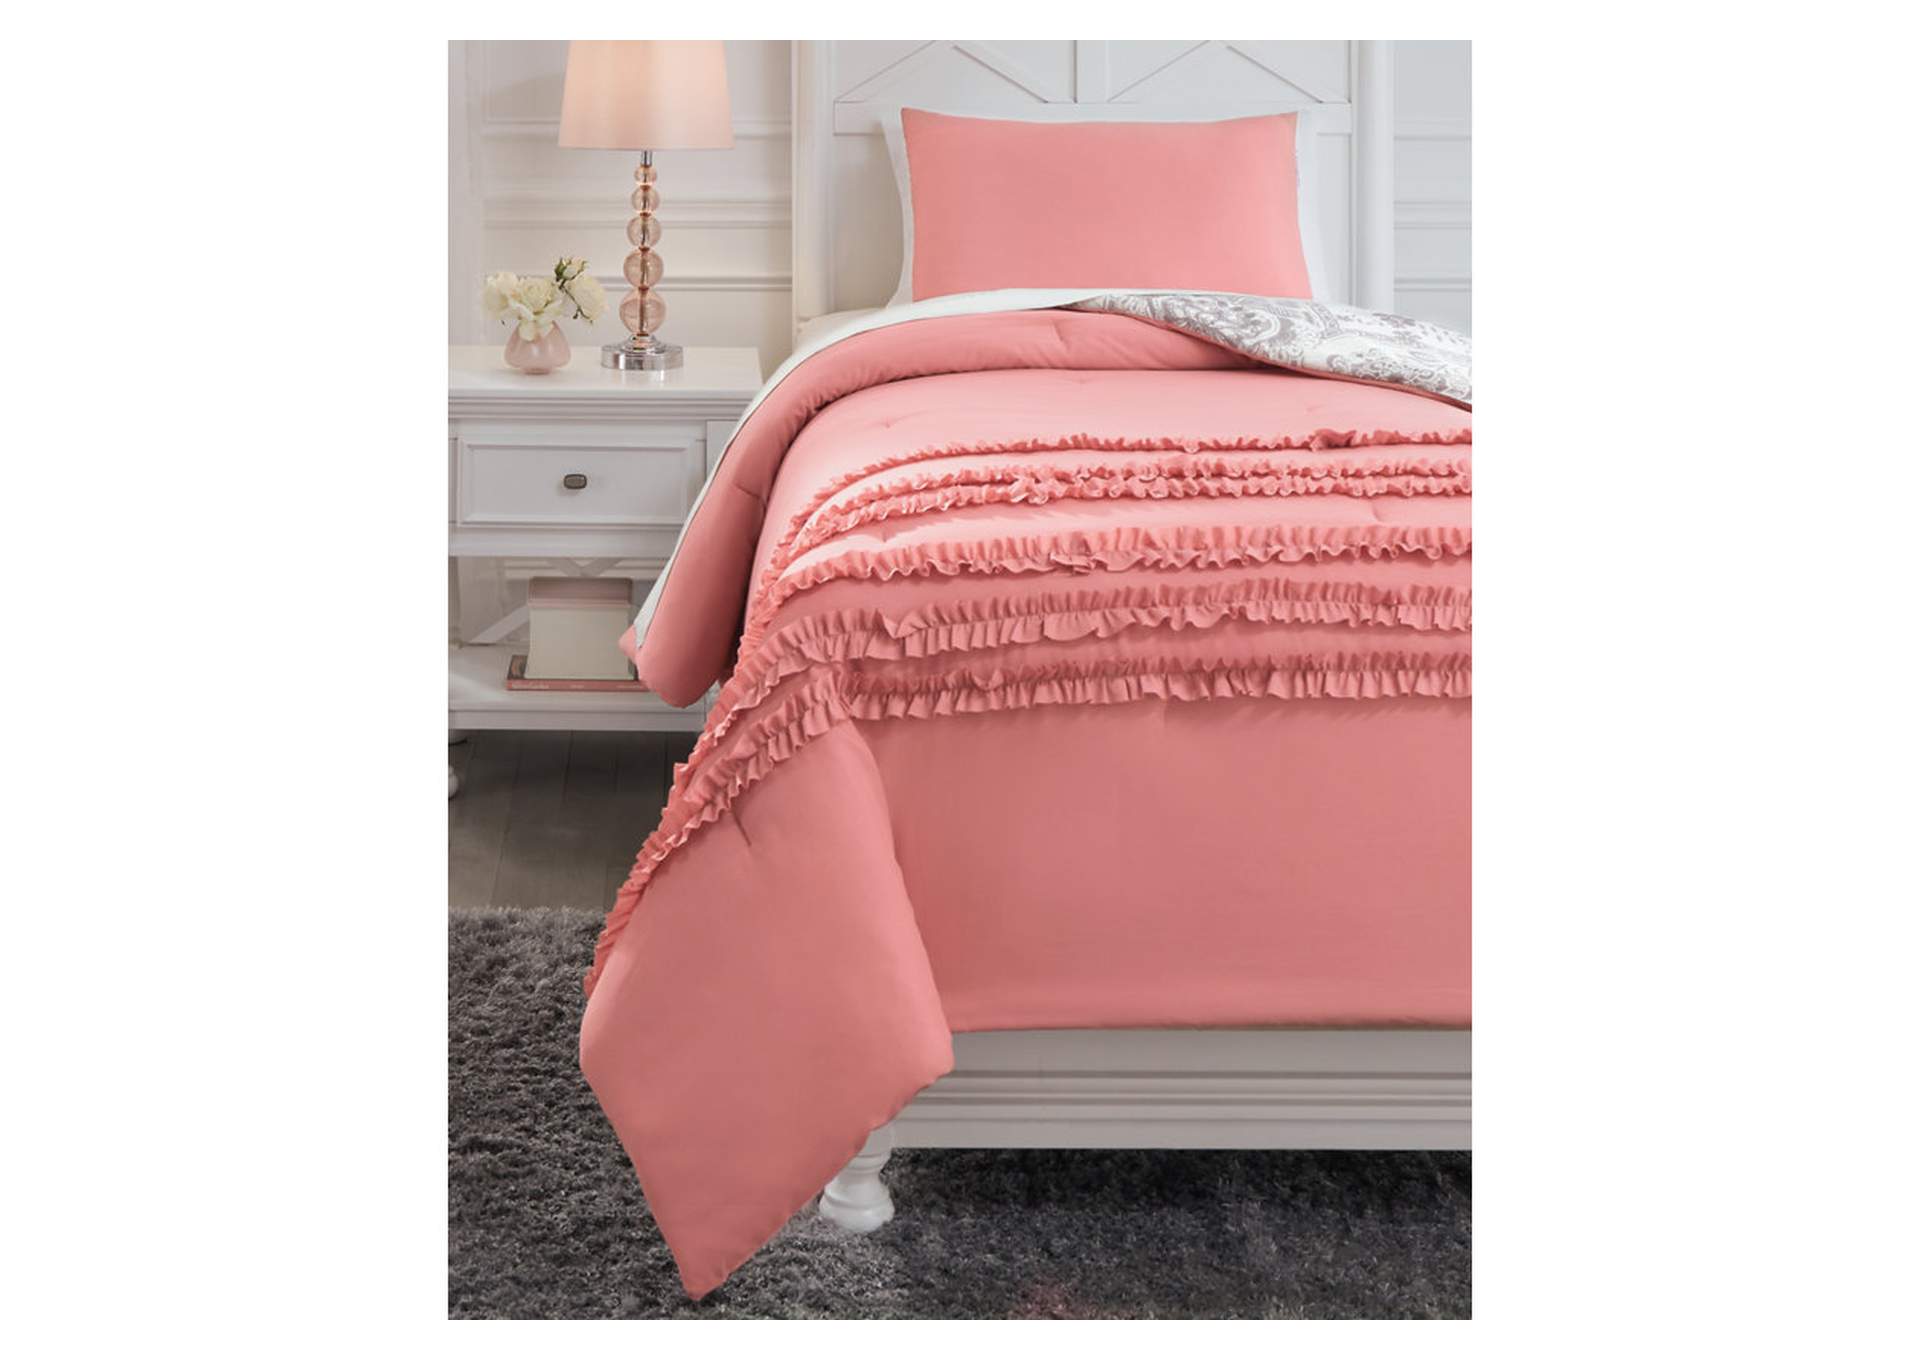 Avaleigh Twin Comforter Set,Signature Design By Ashley